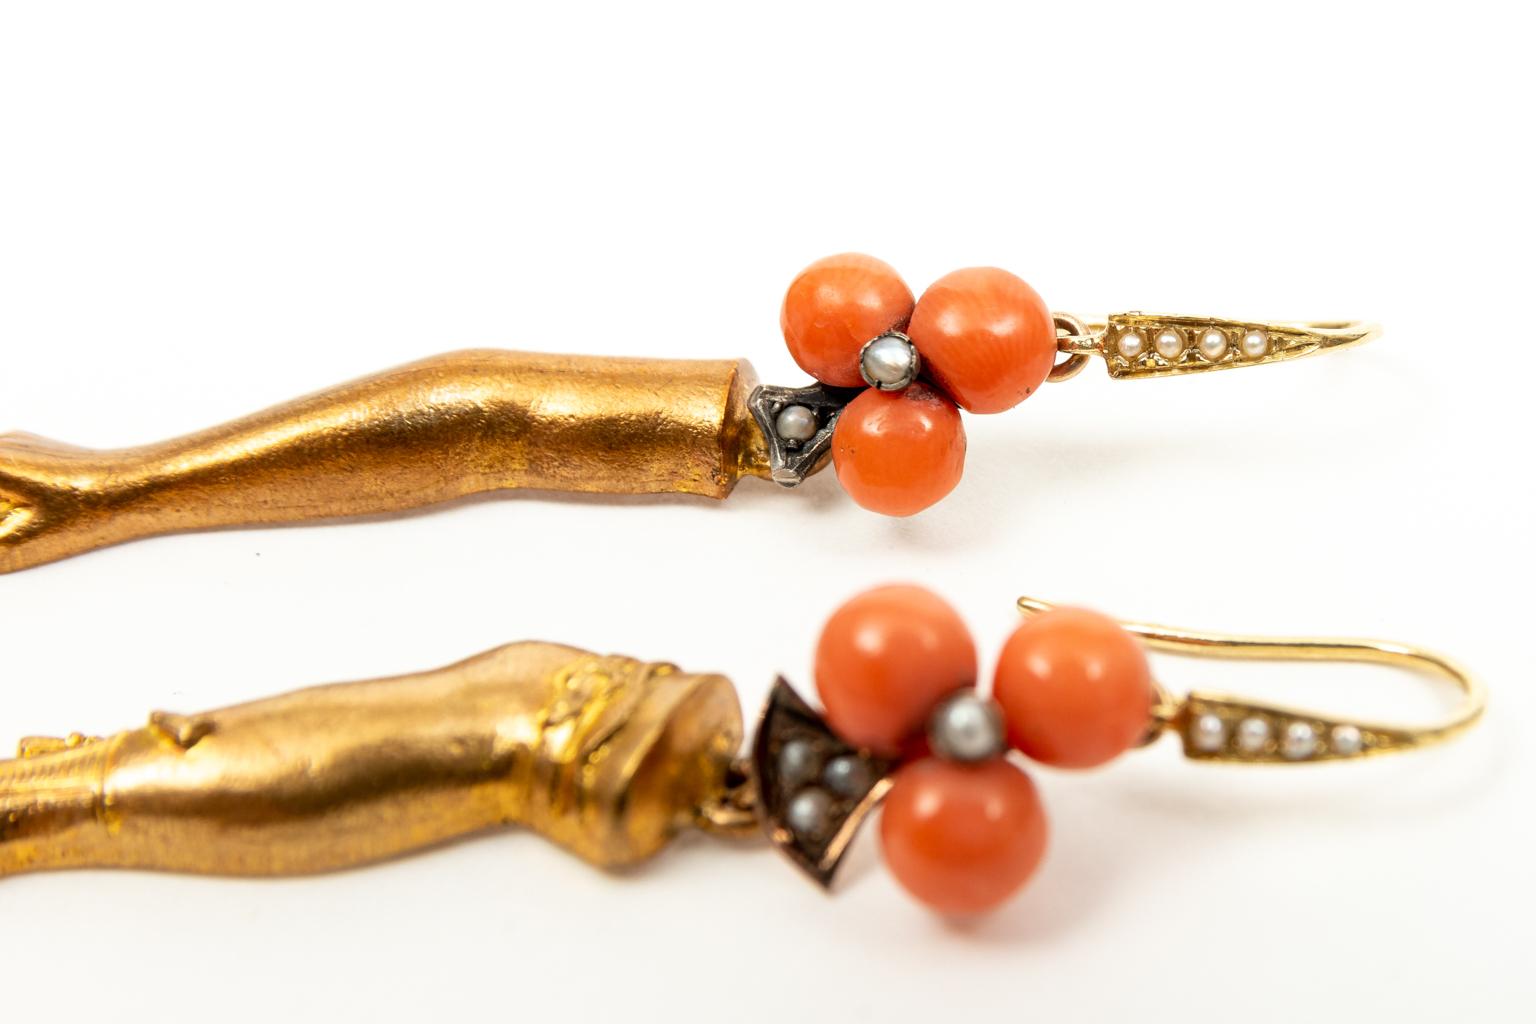 Pair of Vermeil Arm and Leg Earrings Titled 